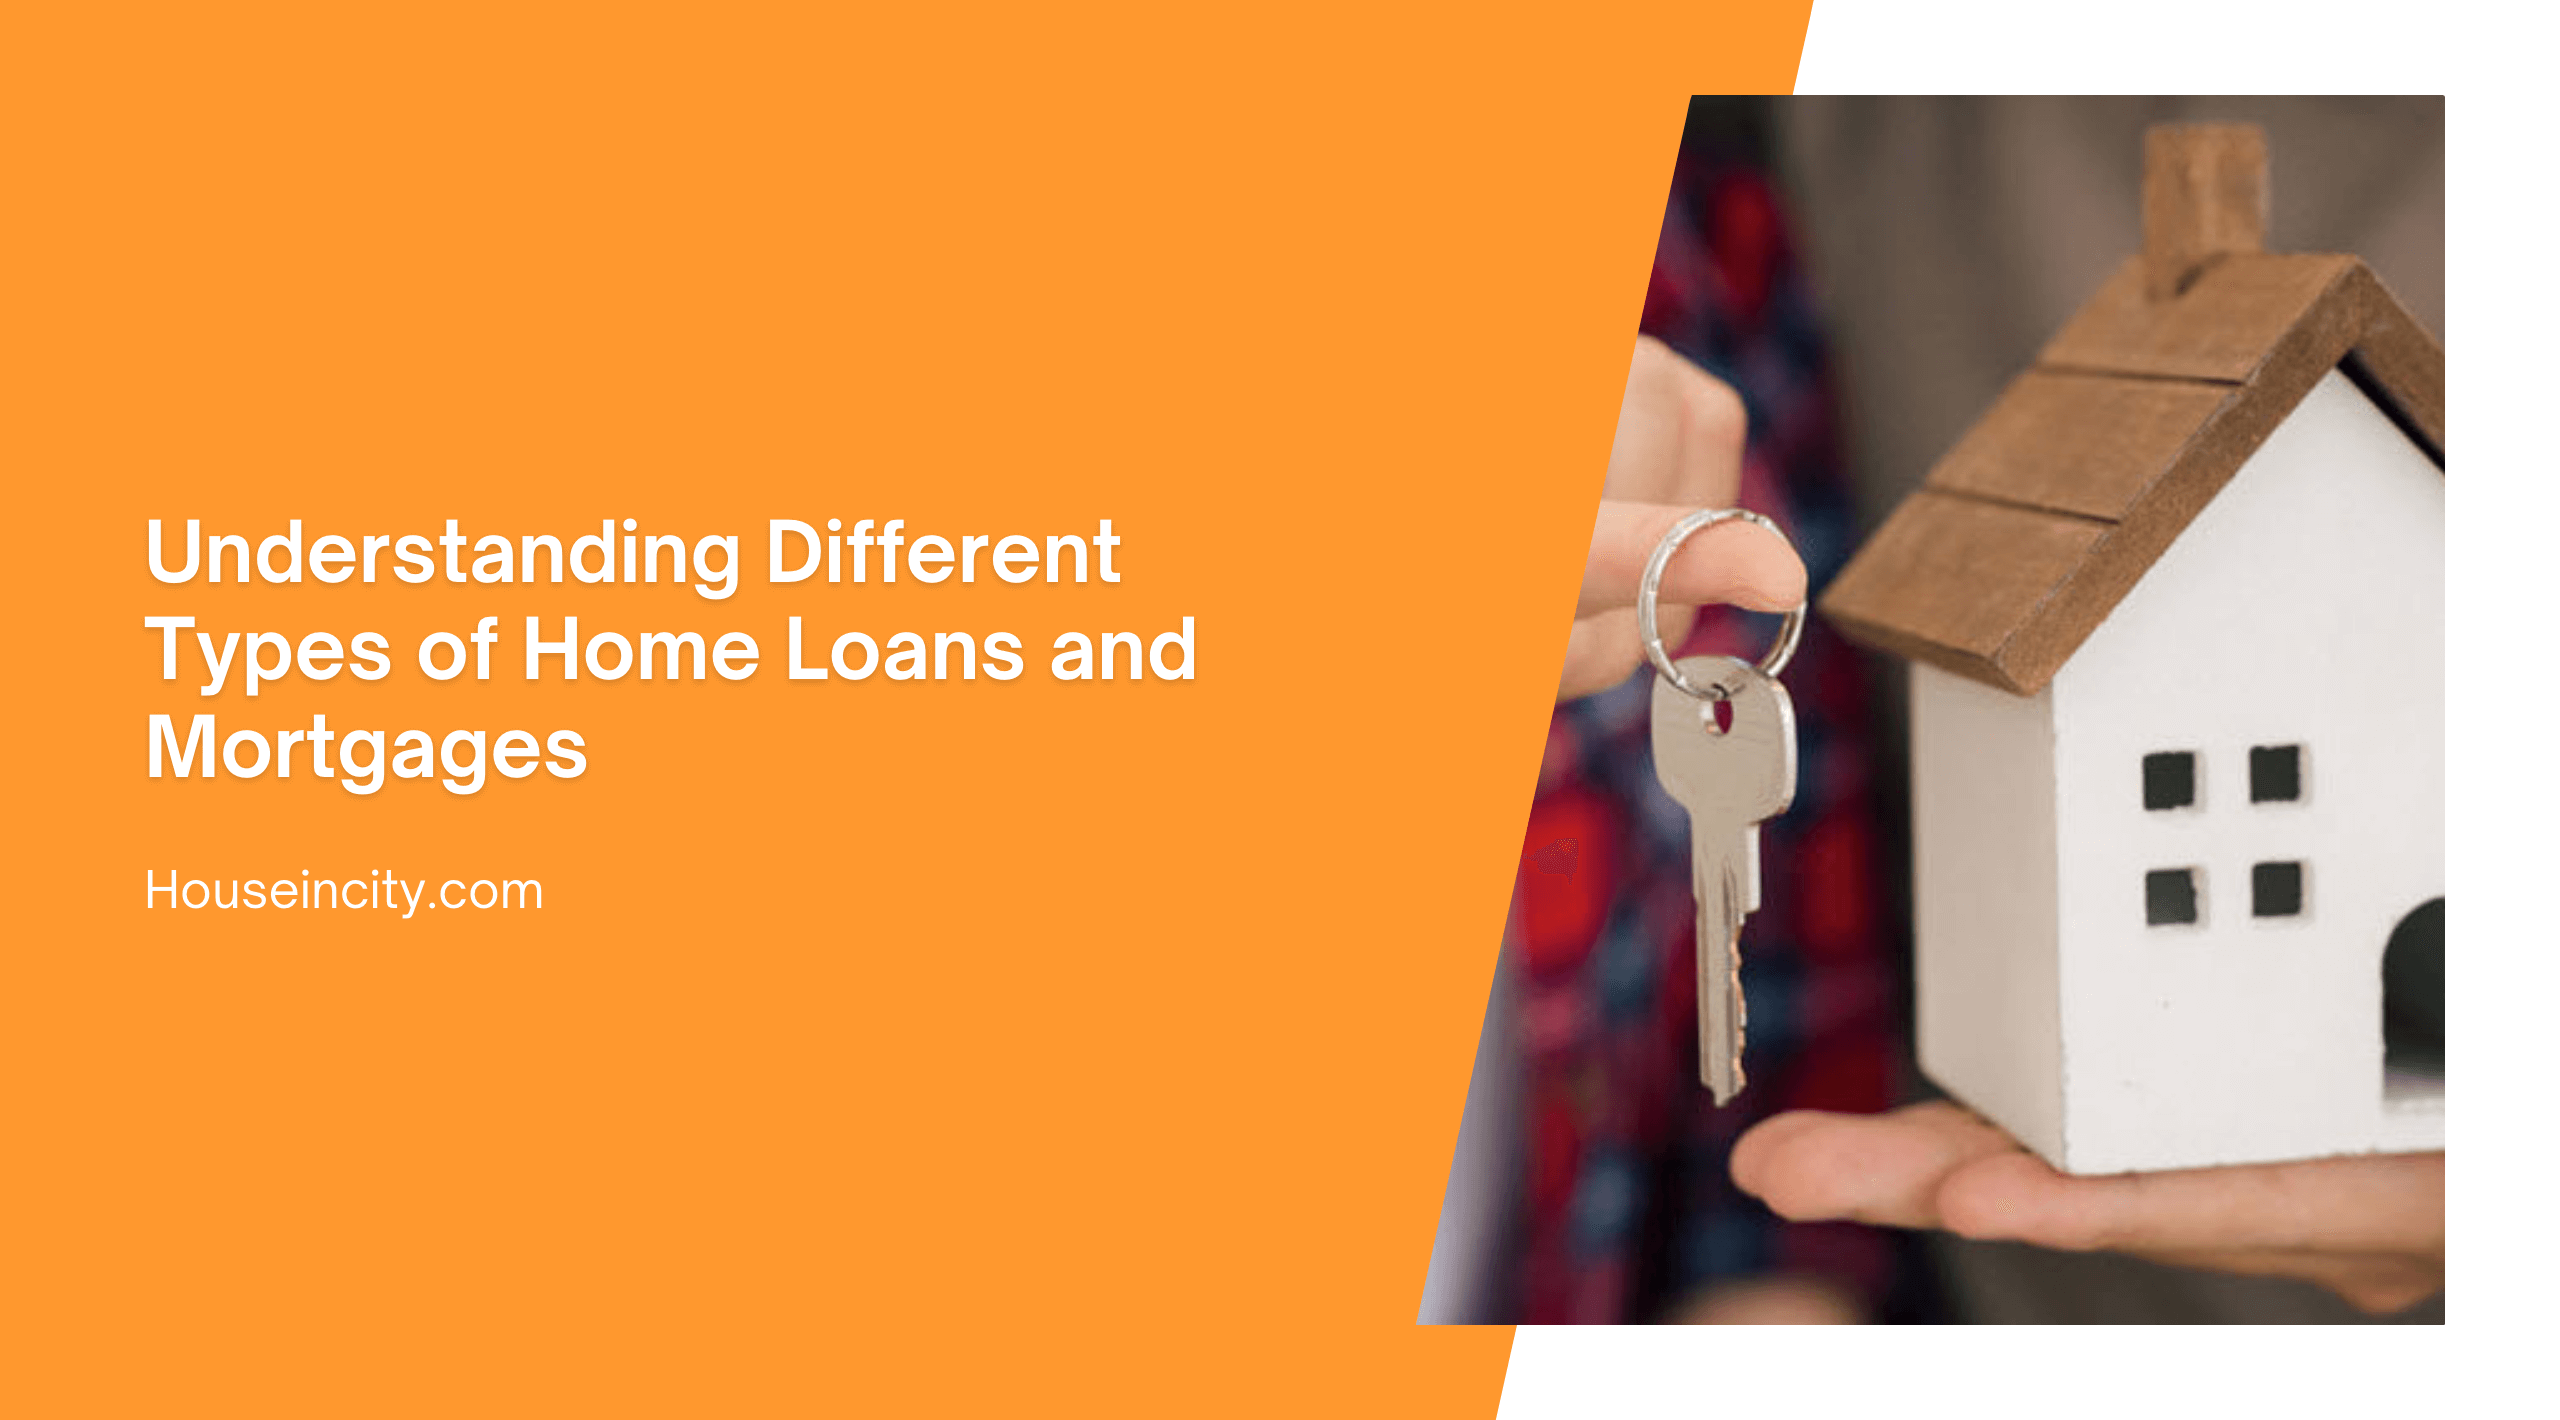 Understanding Different Types of Home Loans and Mortgages